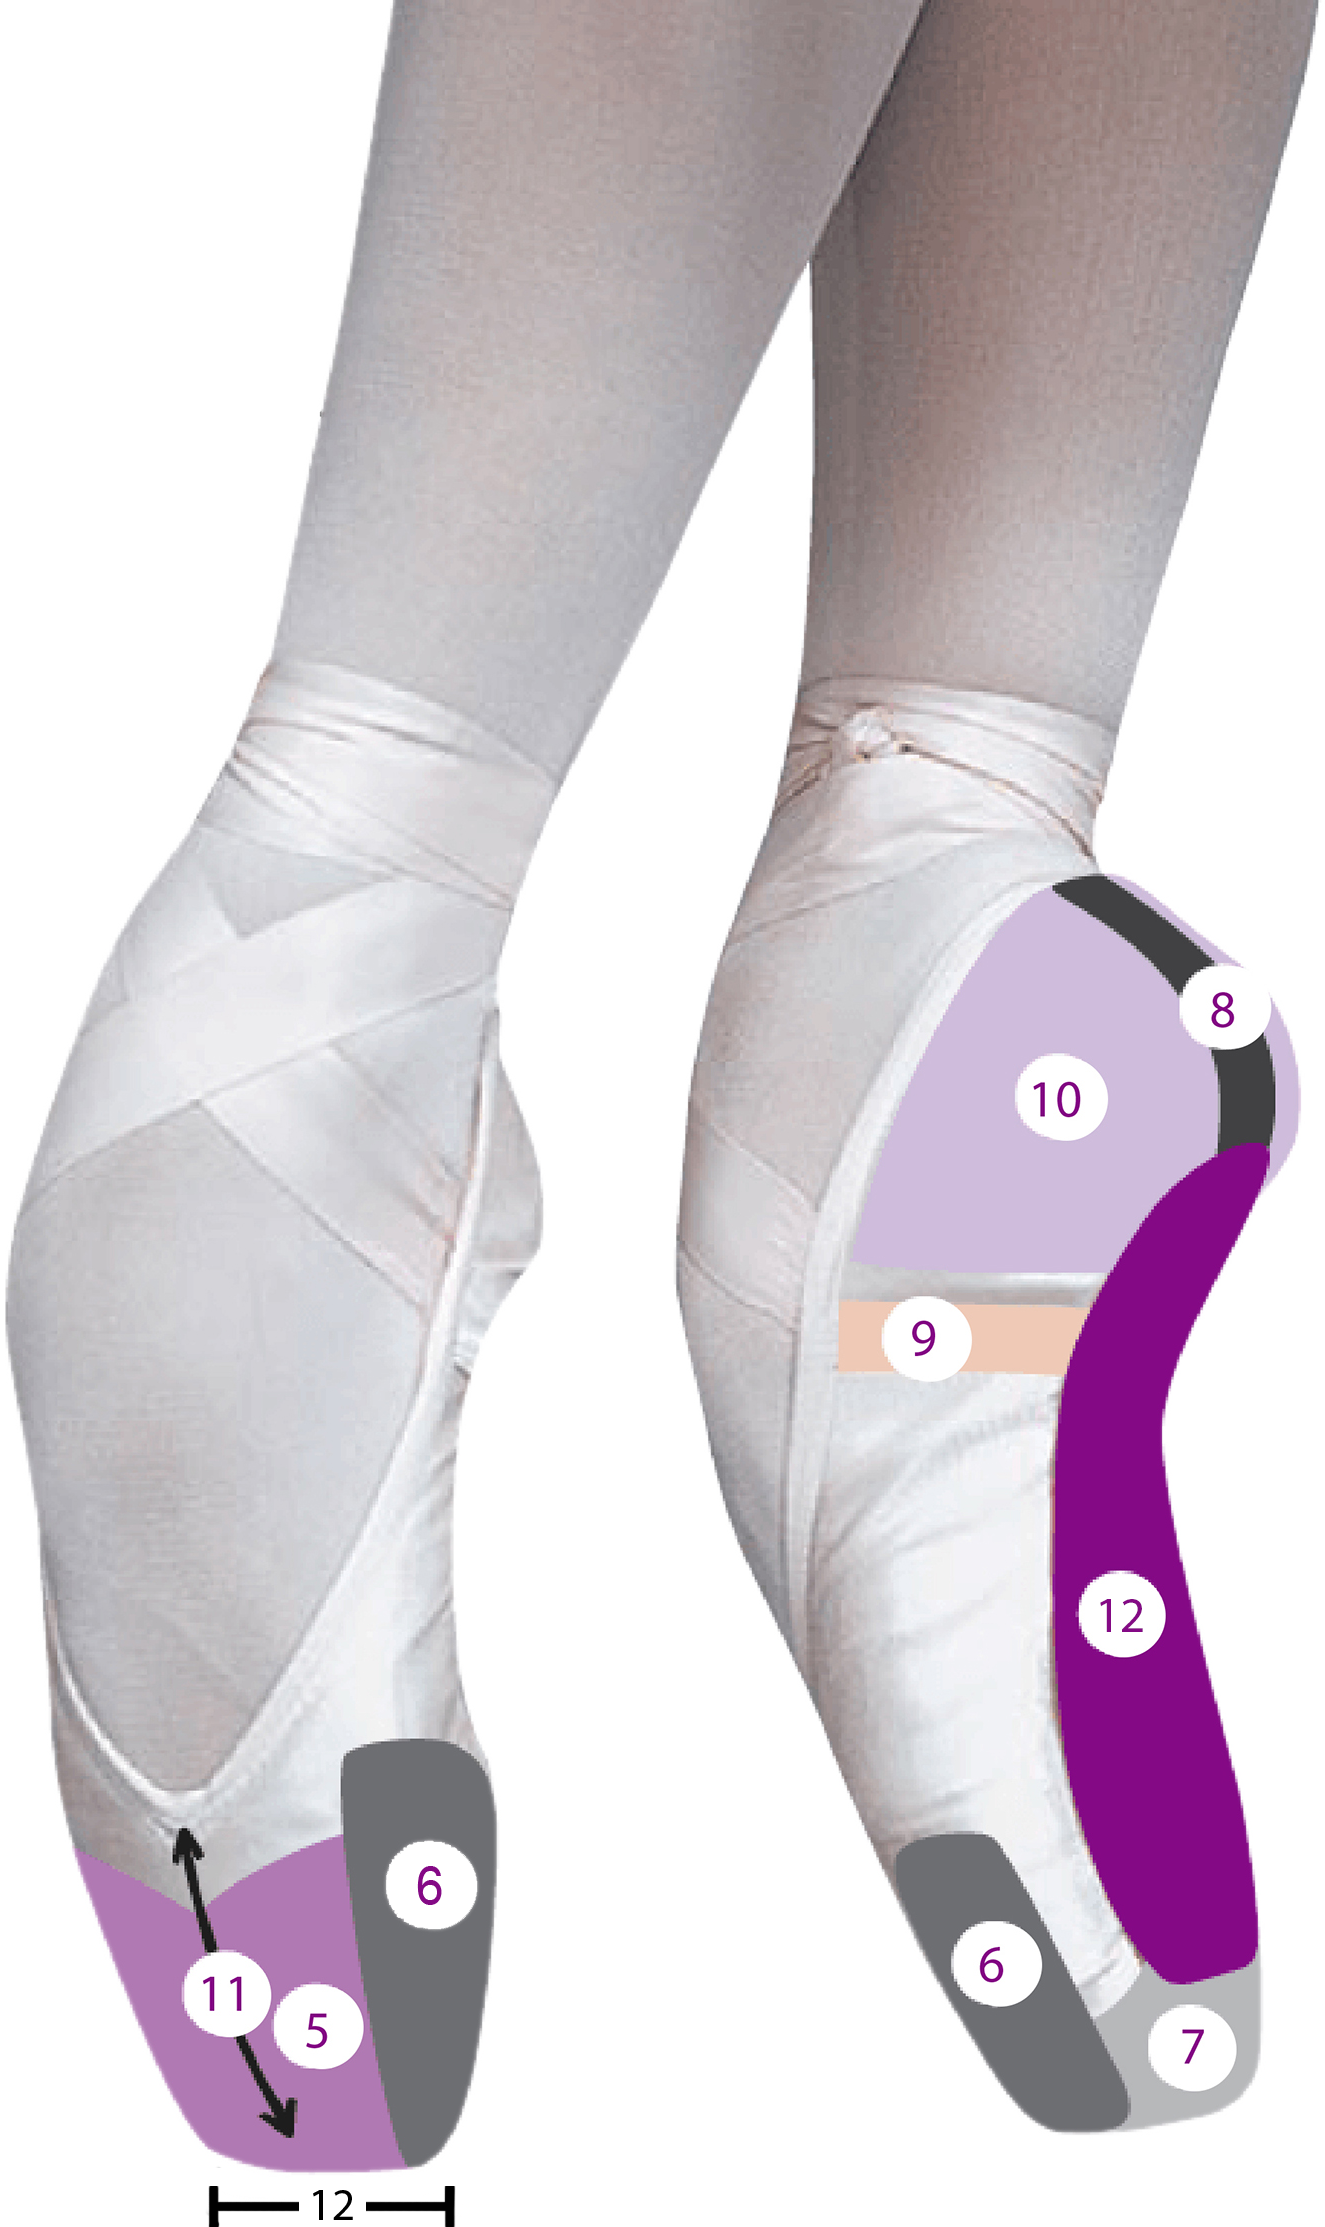 How To Care For Your Pointe Shoes – The Shoe Room